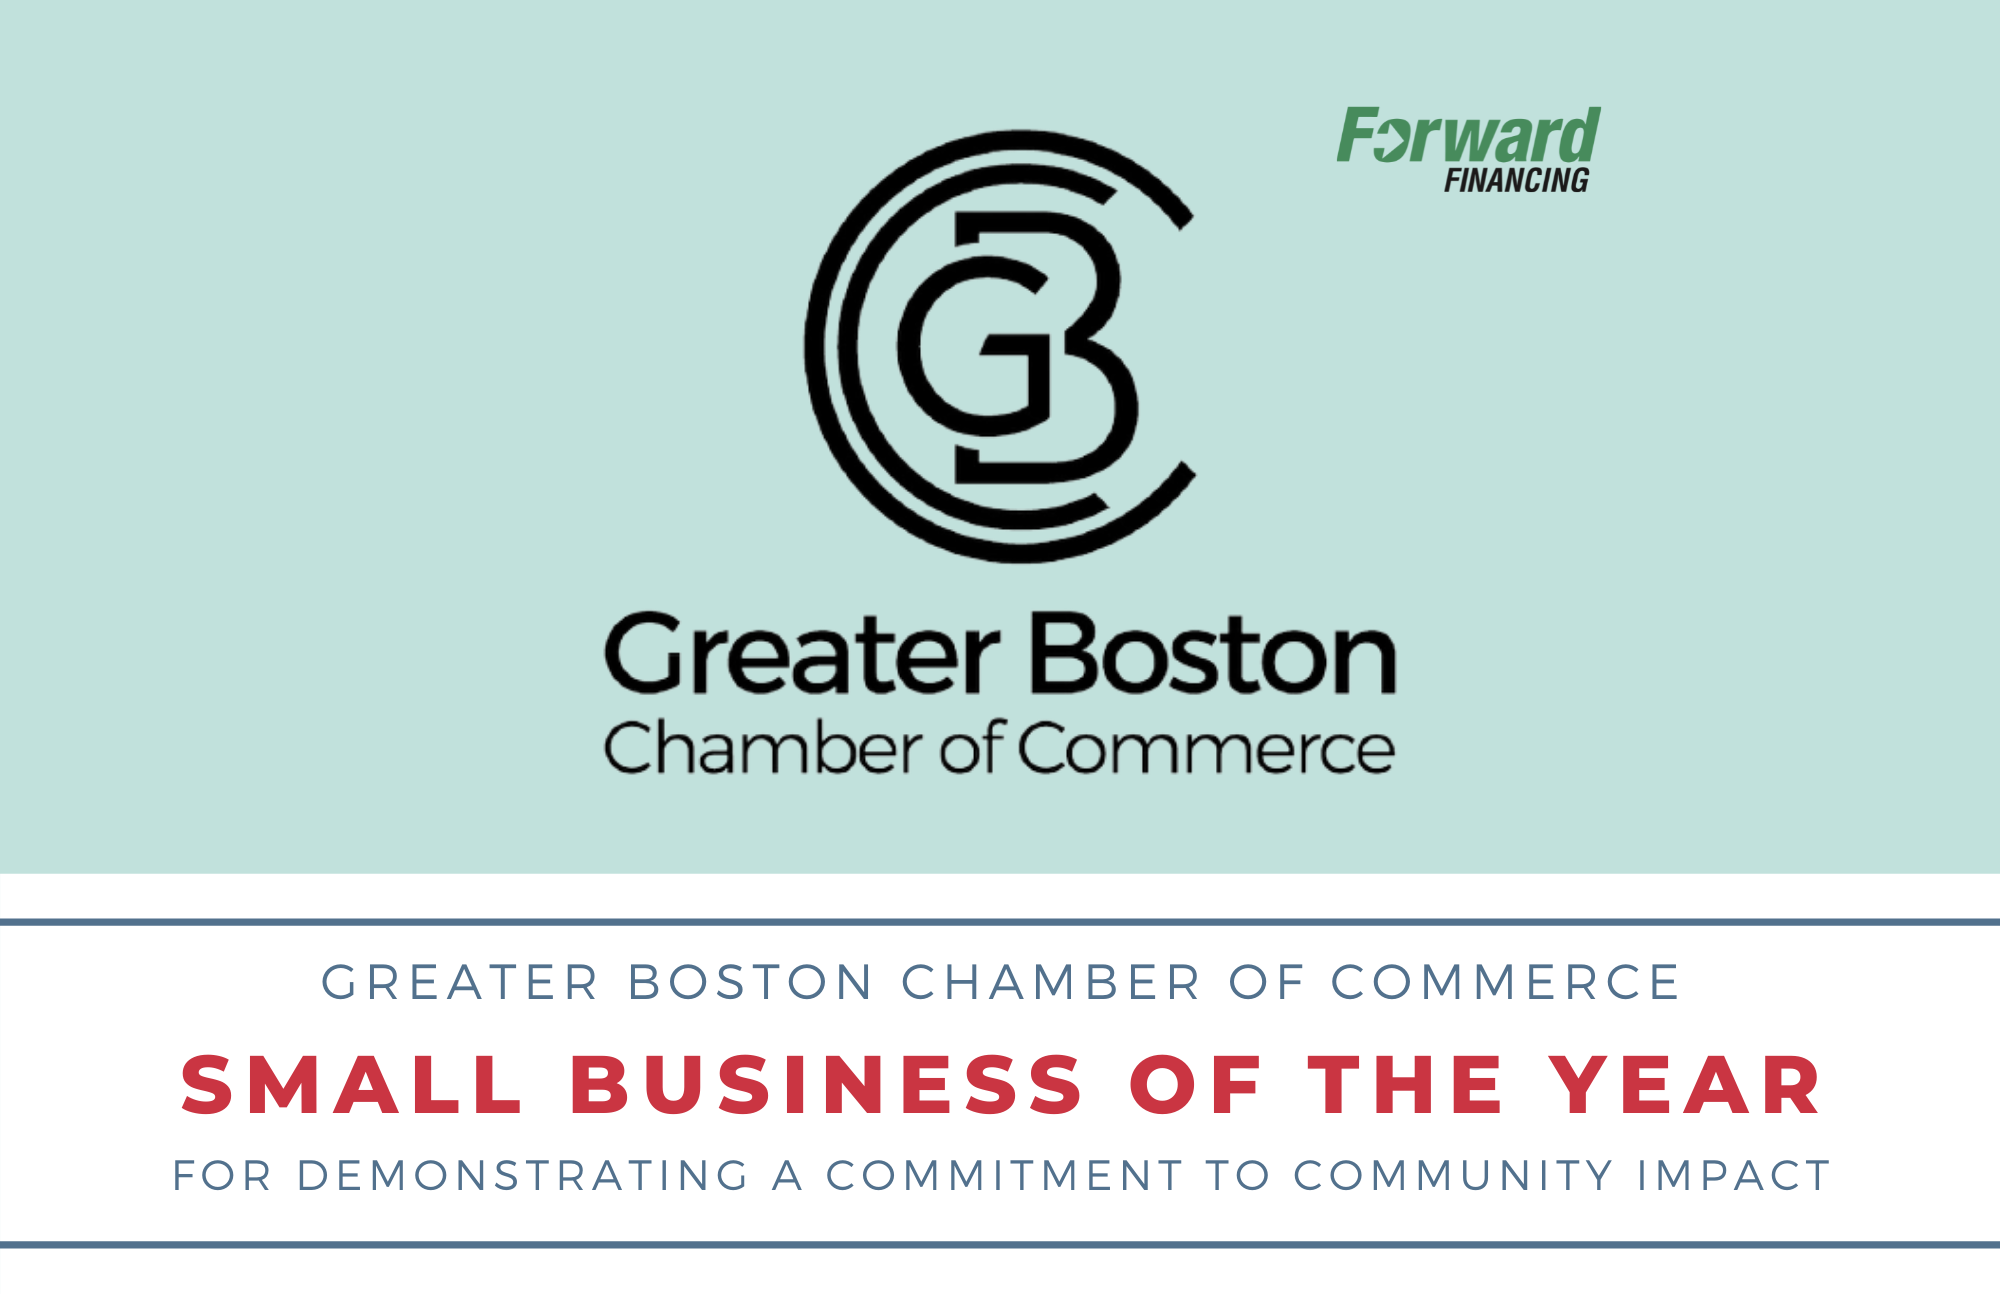 Forward Financing Small Business of Year for Community Impact Image